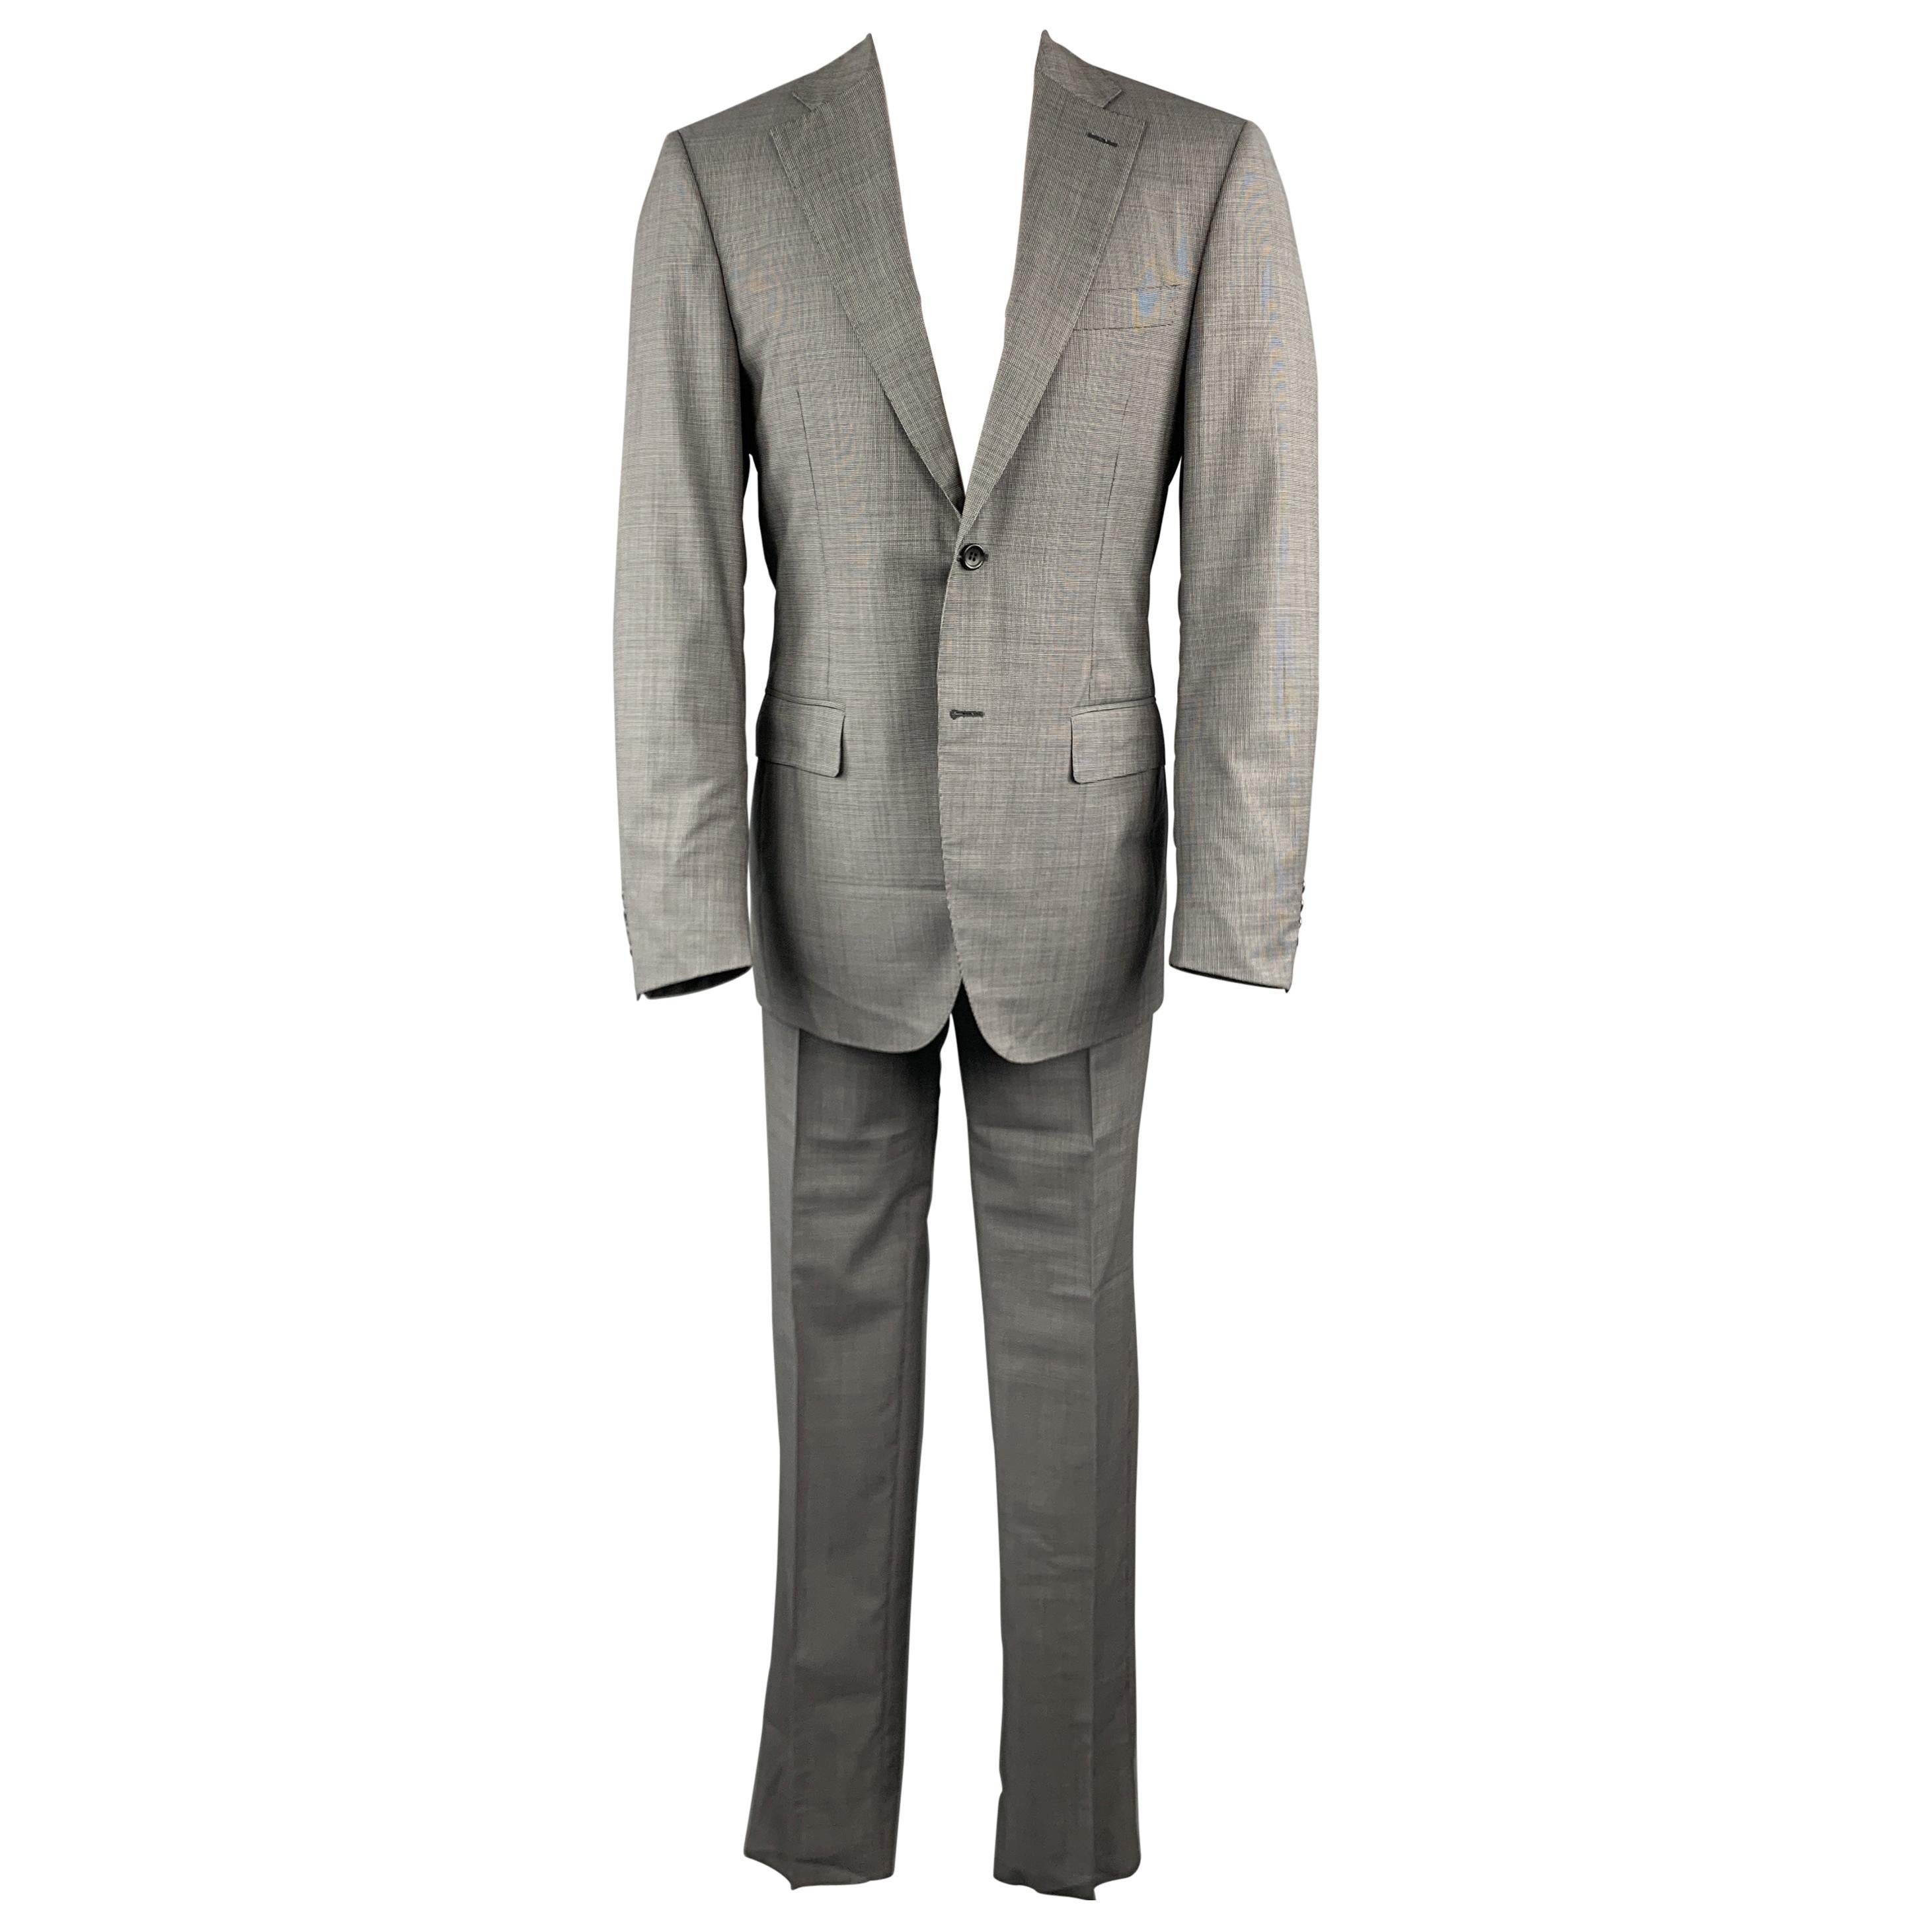 Canali On Sale - 4 For Sale on 1stDibs | canali sale, canali blazer sale,  canali suit sale